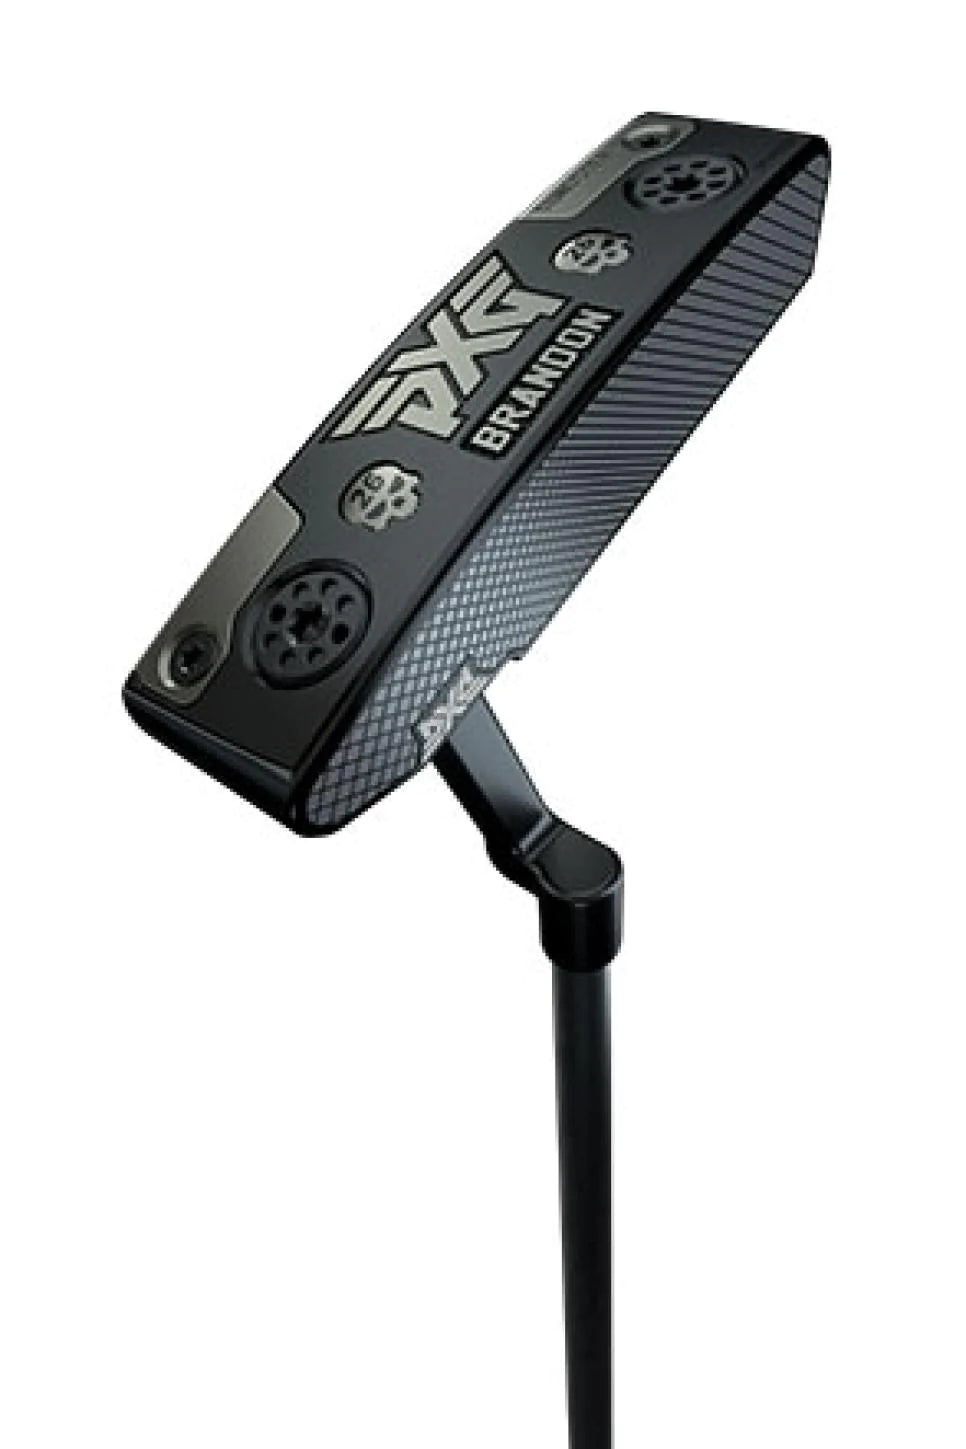 pros and cons of pxg battle ready brandon putter